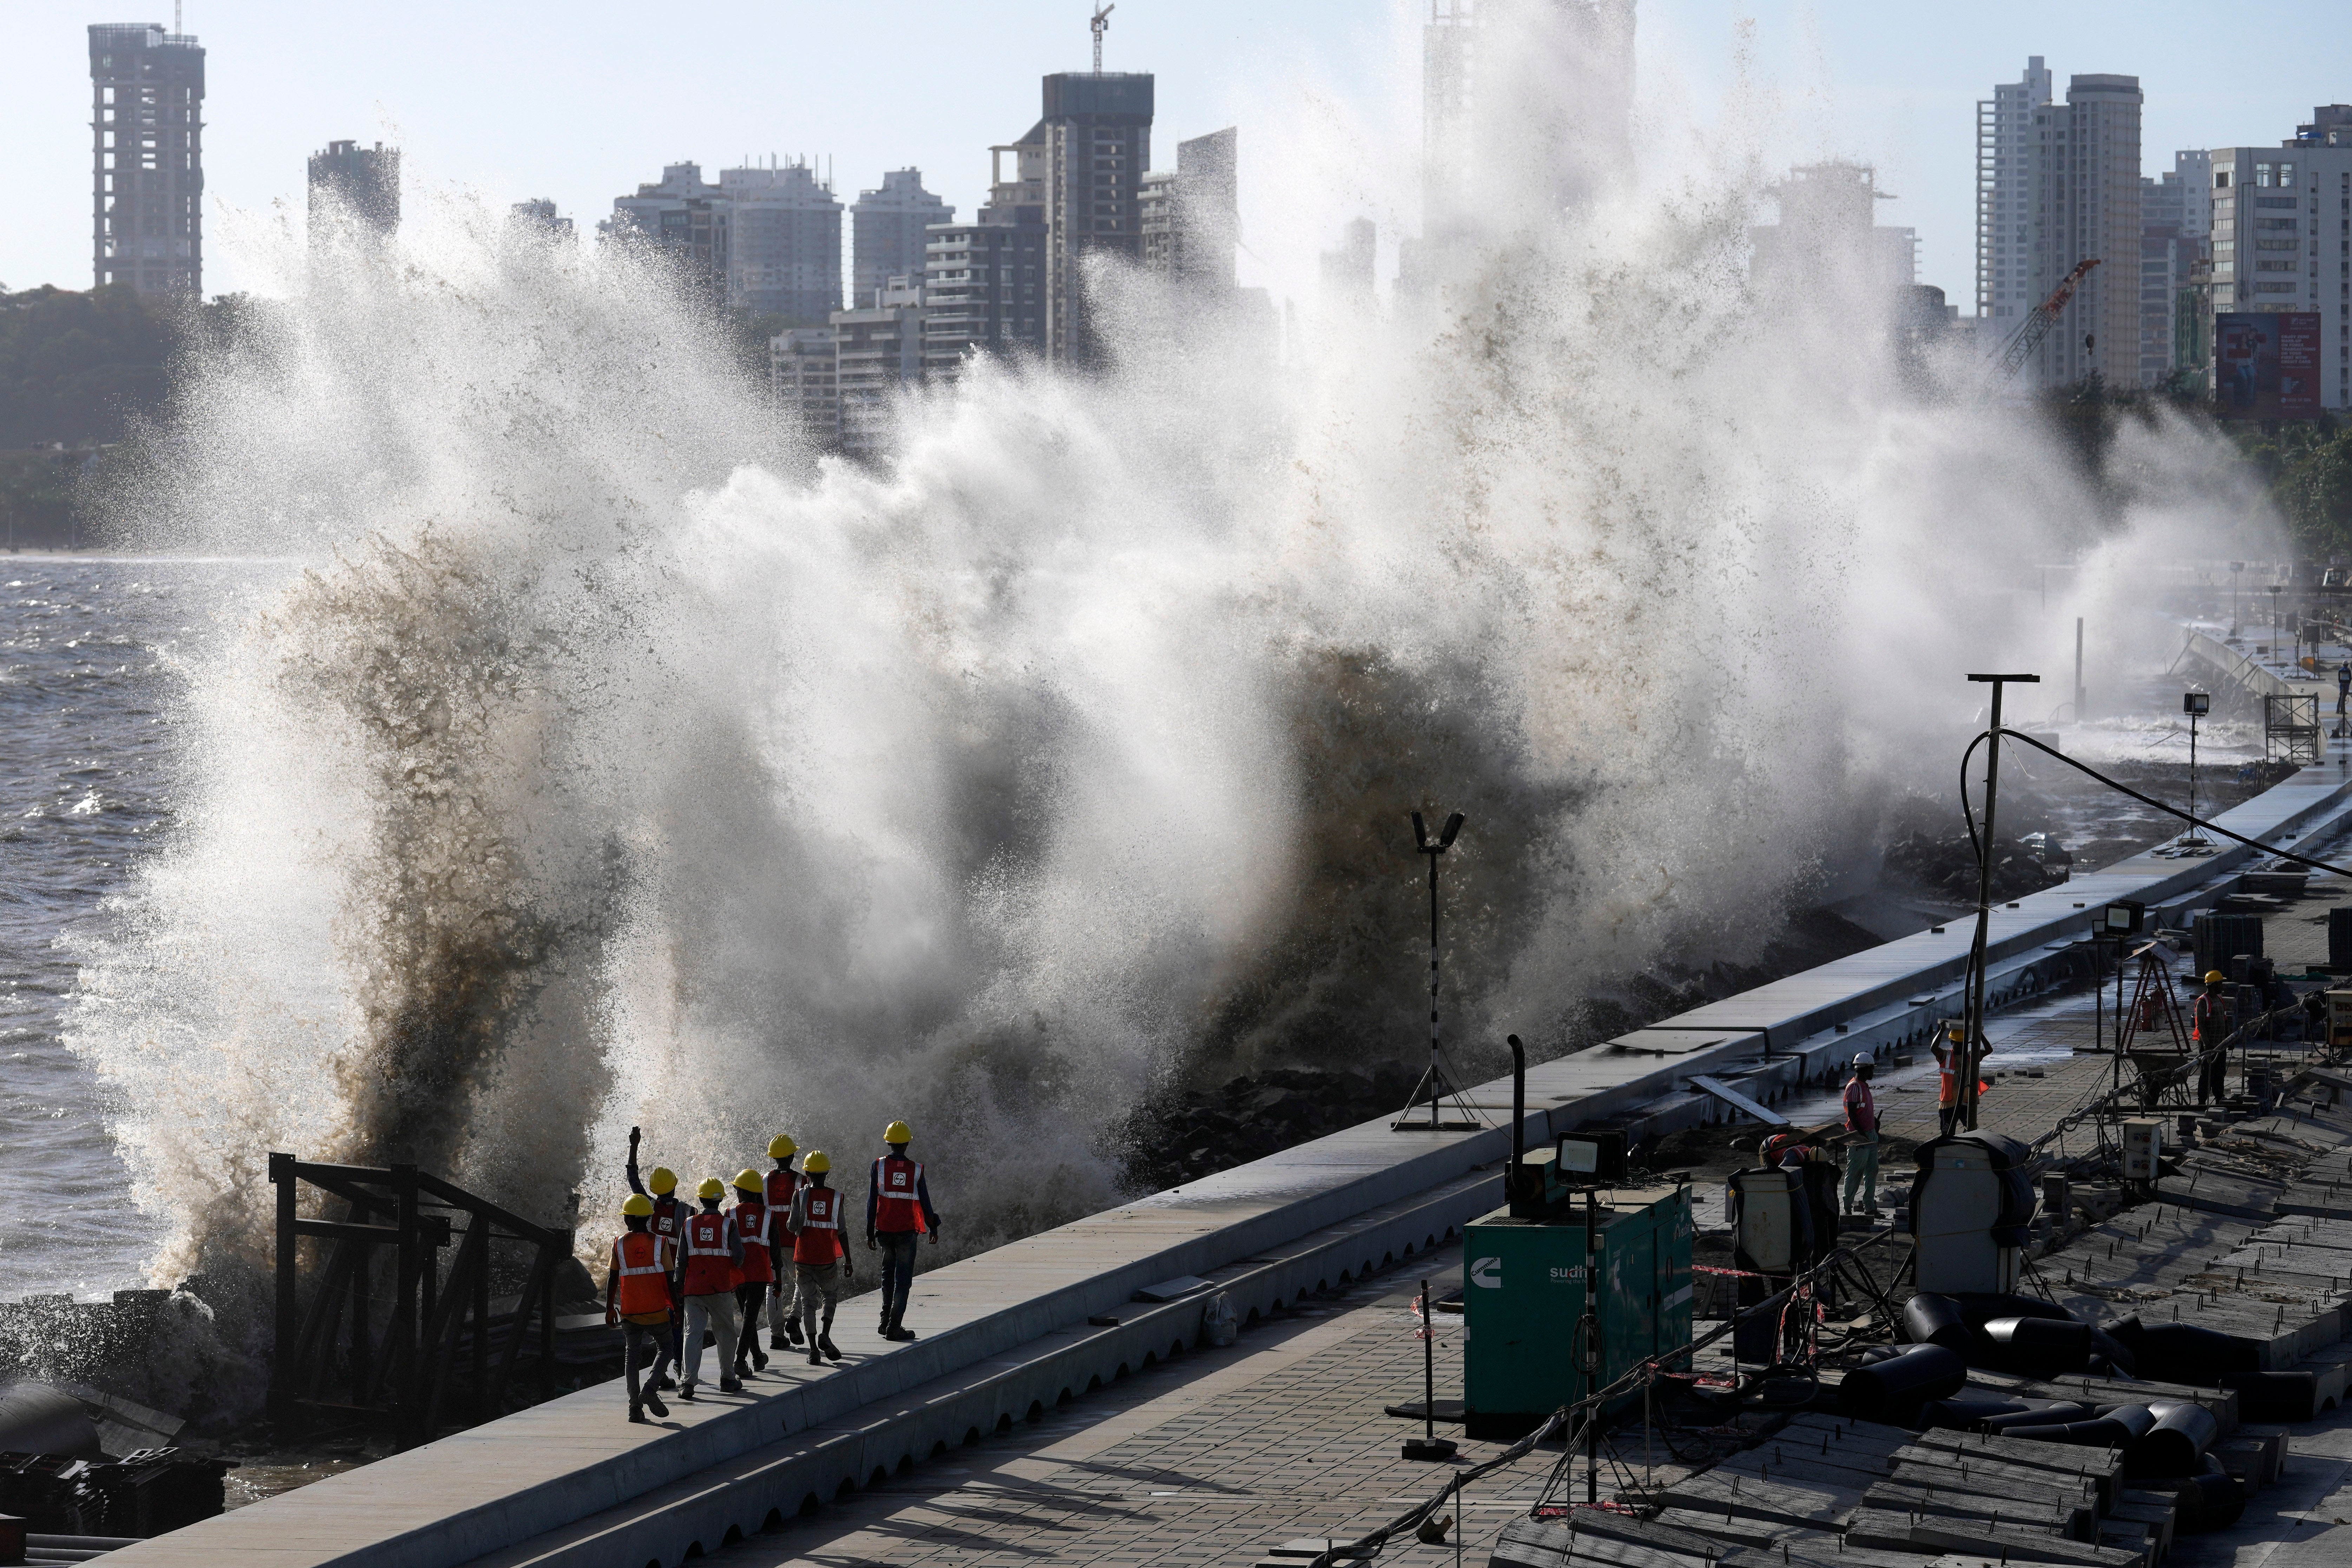 Coastal road workers walk as waves hit the city's waterfront during high tide in the Arabian Sea at Marine Drive in Mumbai